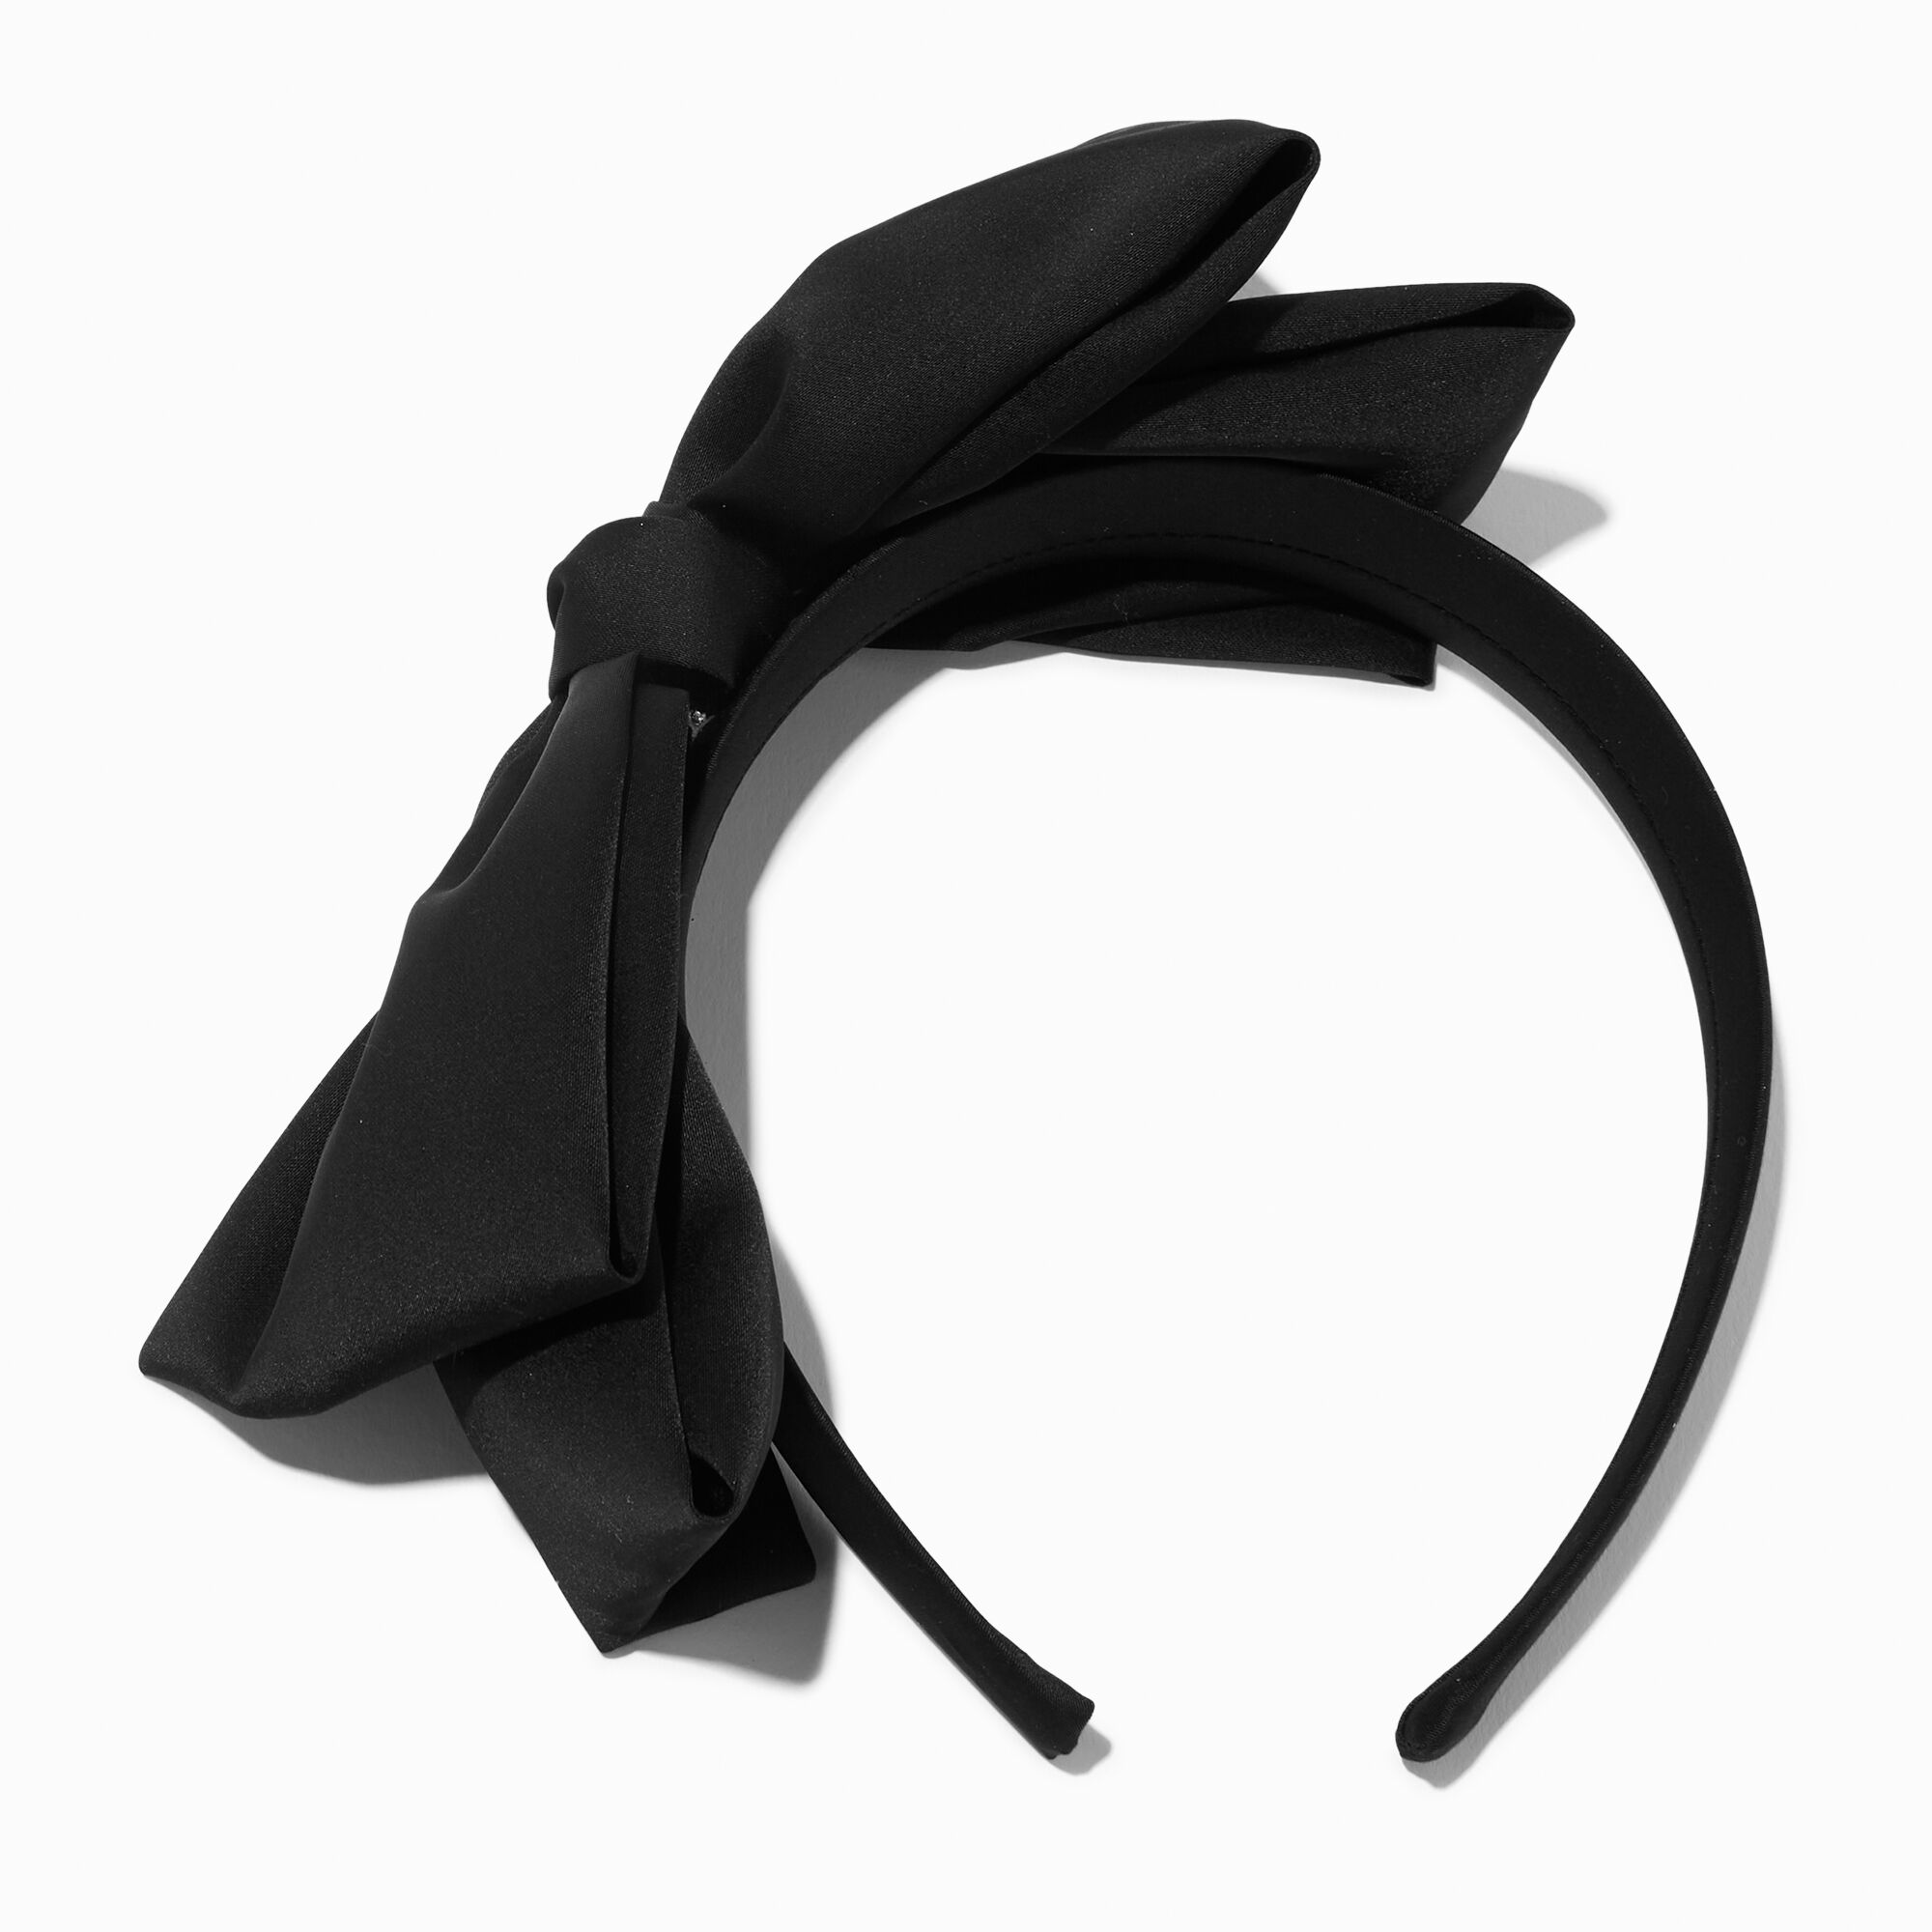 View Claires Silky Knotted Bow Headband Black information